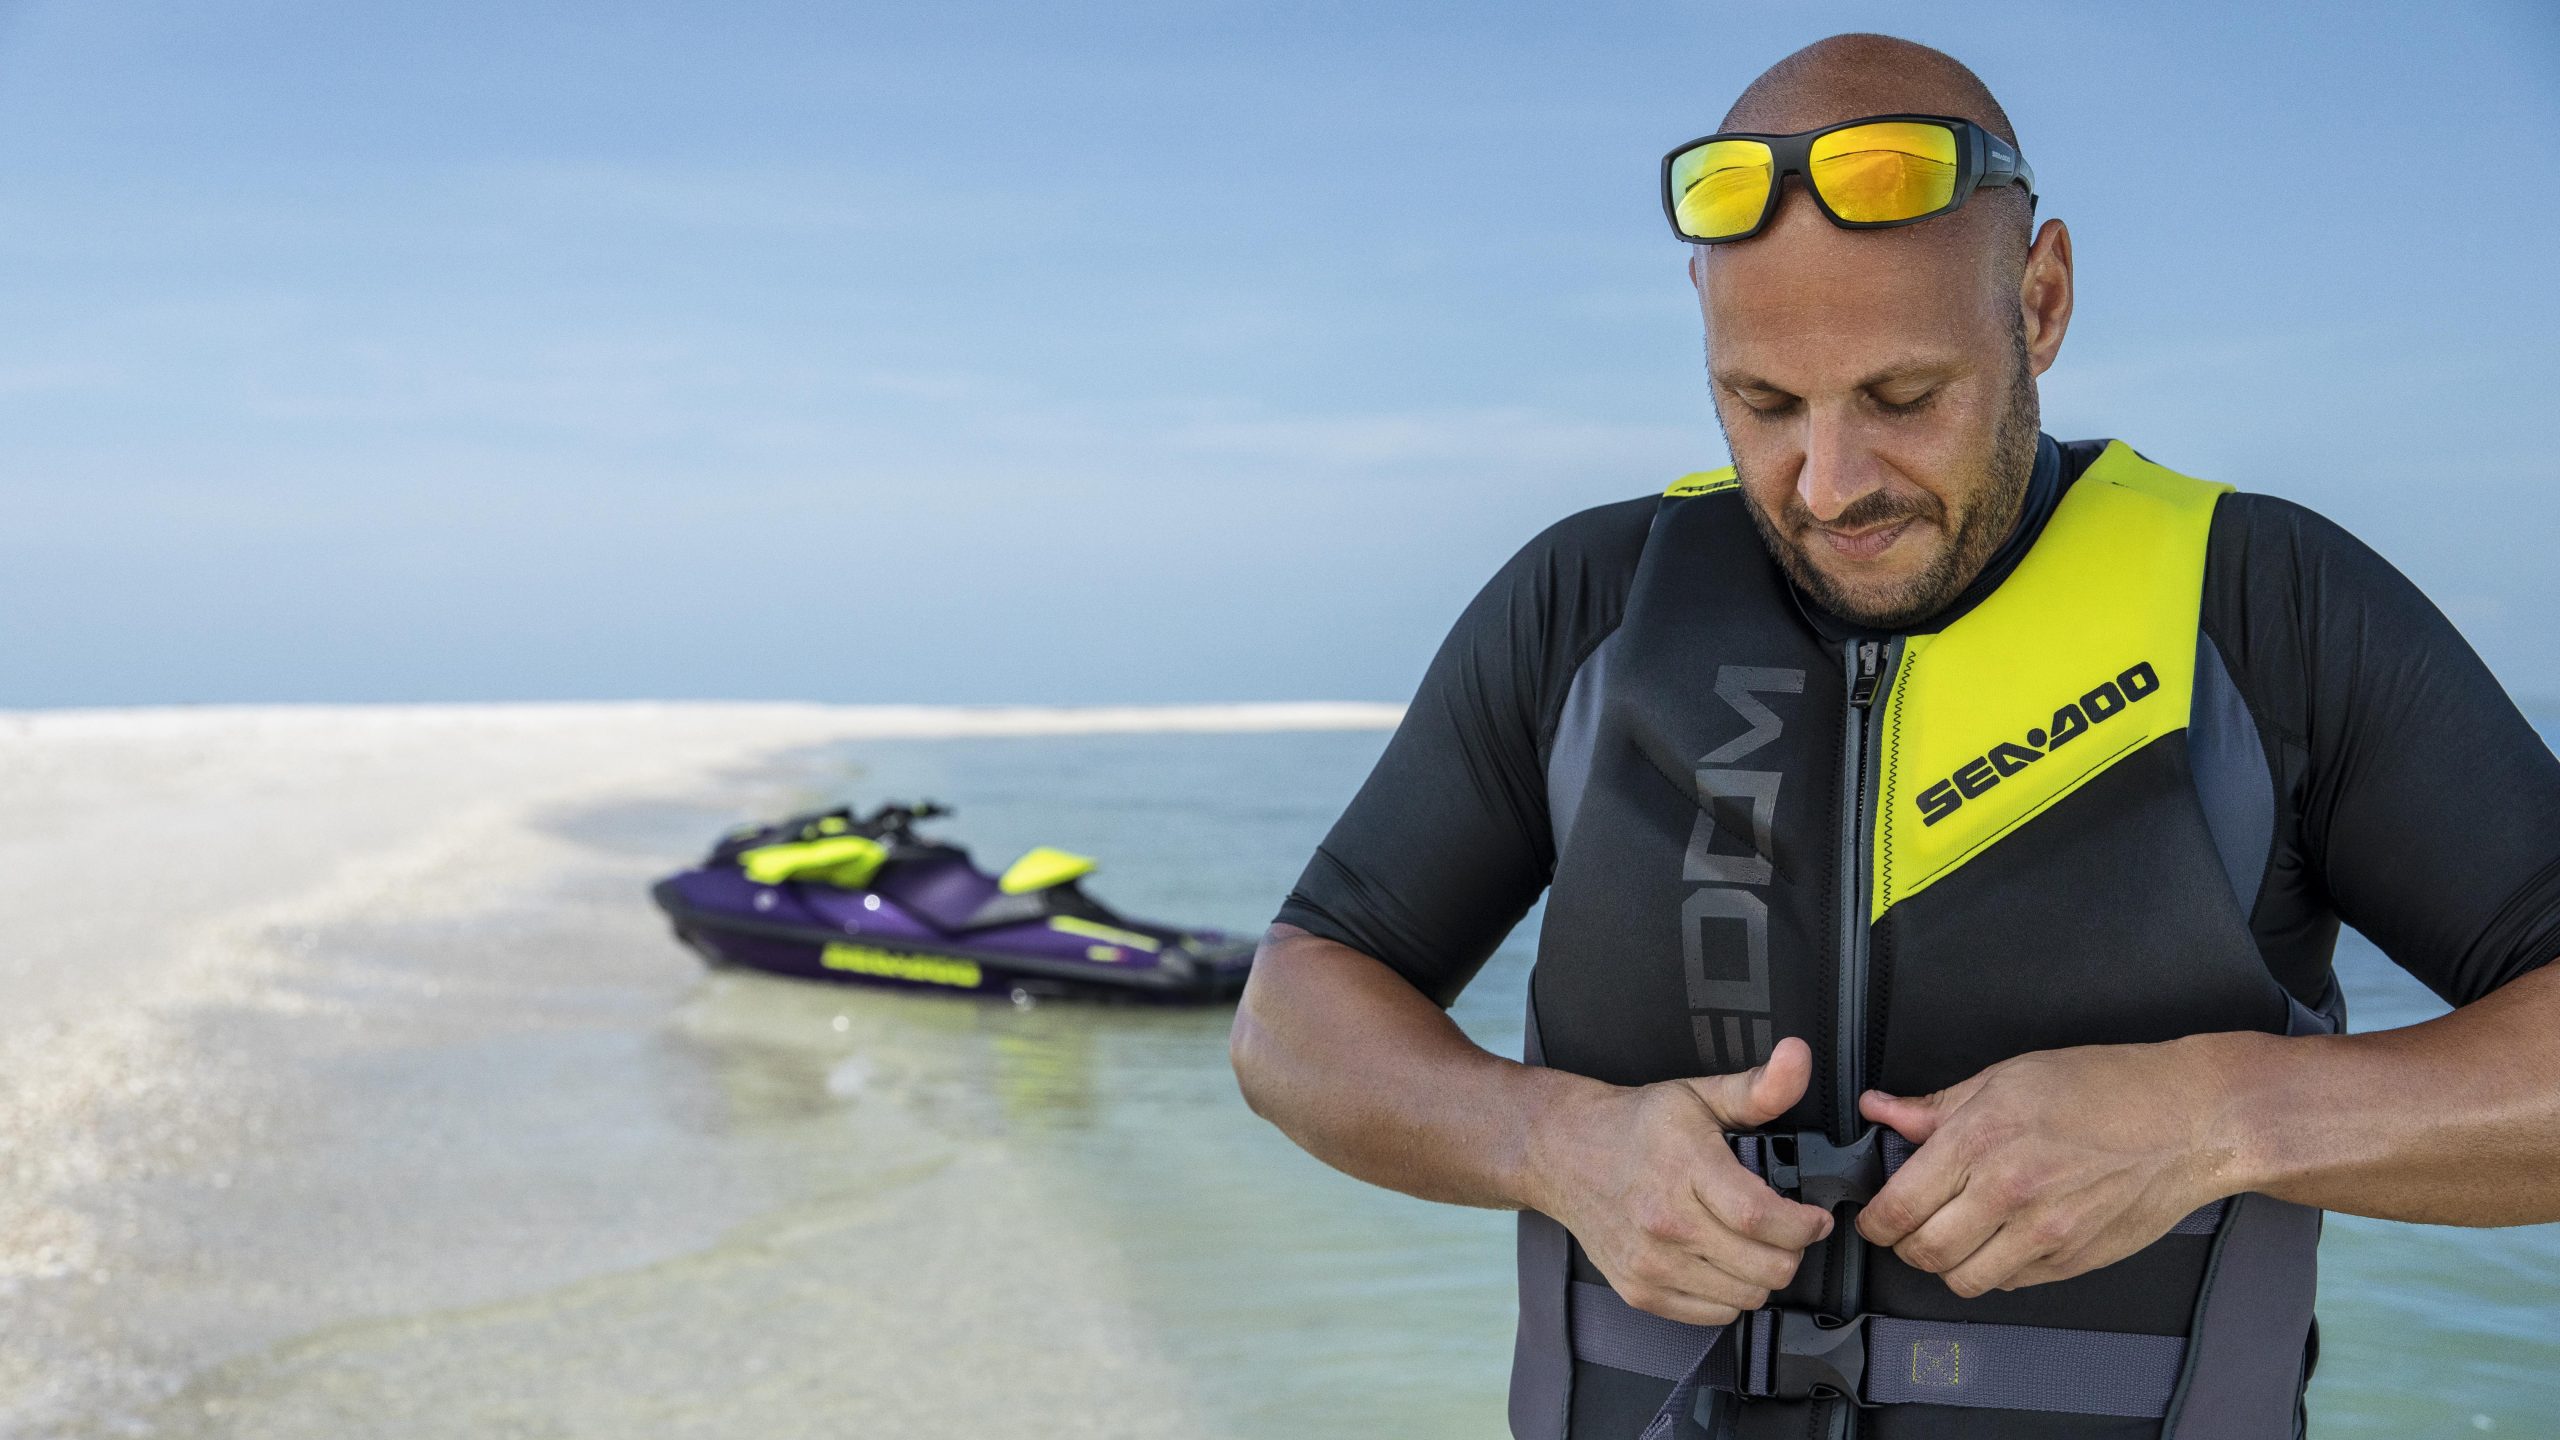 32 Must Have Jet Ski Accessories - Recommended for PWC Enthusiasts